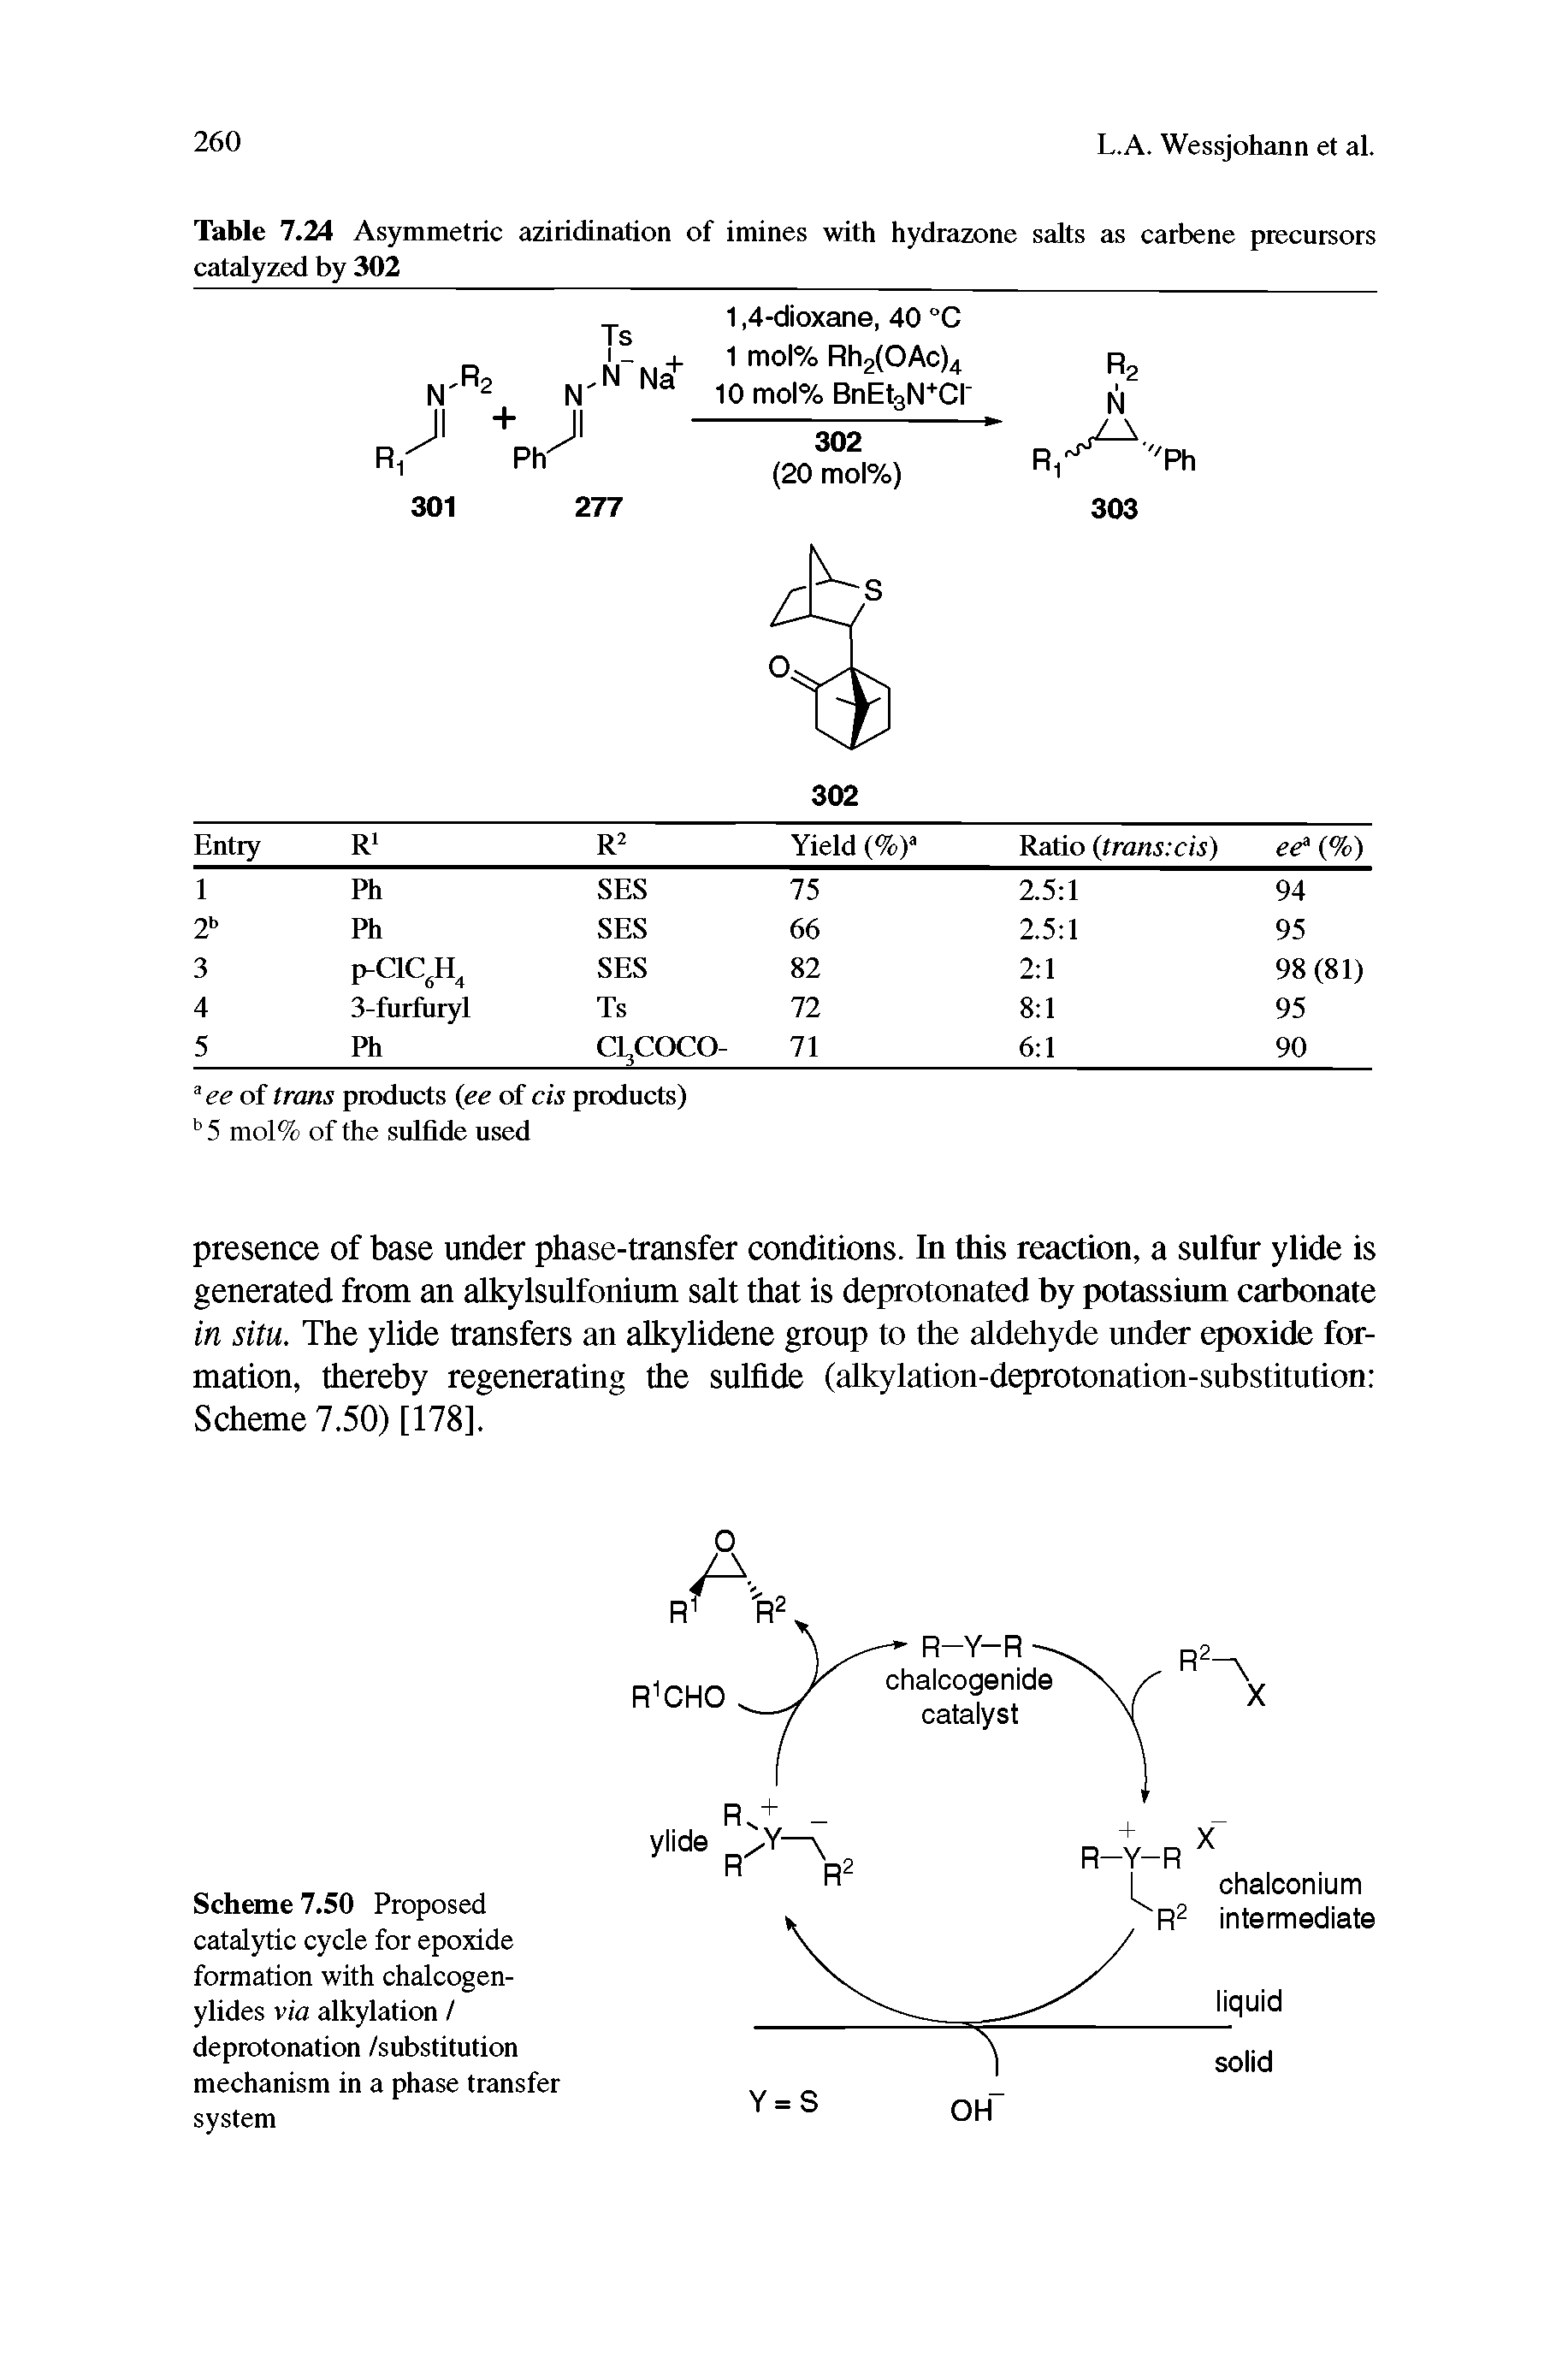 Scheme 7.50 Proposed catalytic cycle for epoxide formation with chalcogen-ylides via alkylation / deprotonation /substitution mechanism in a phase transfer system...